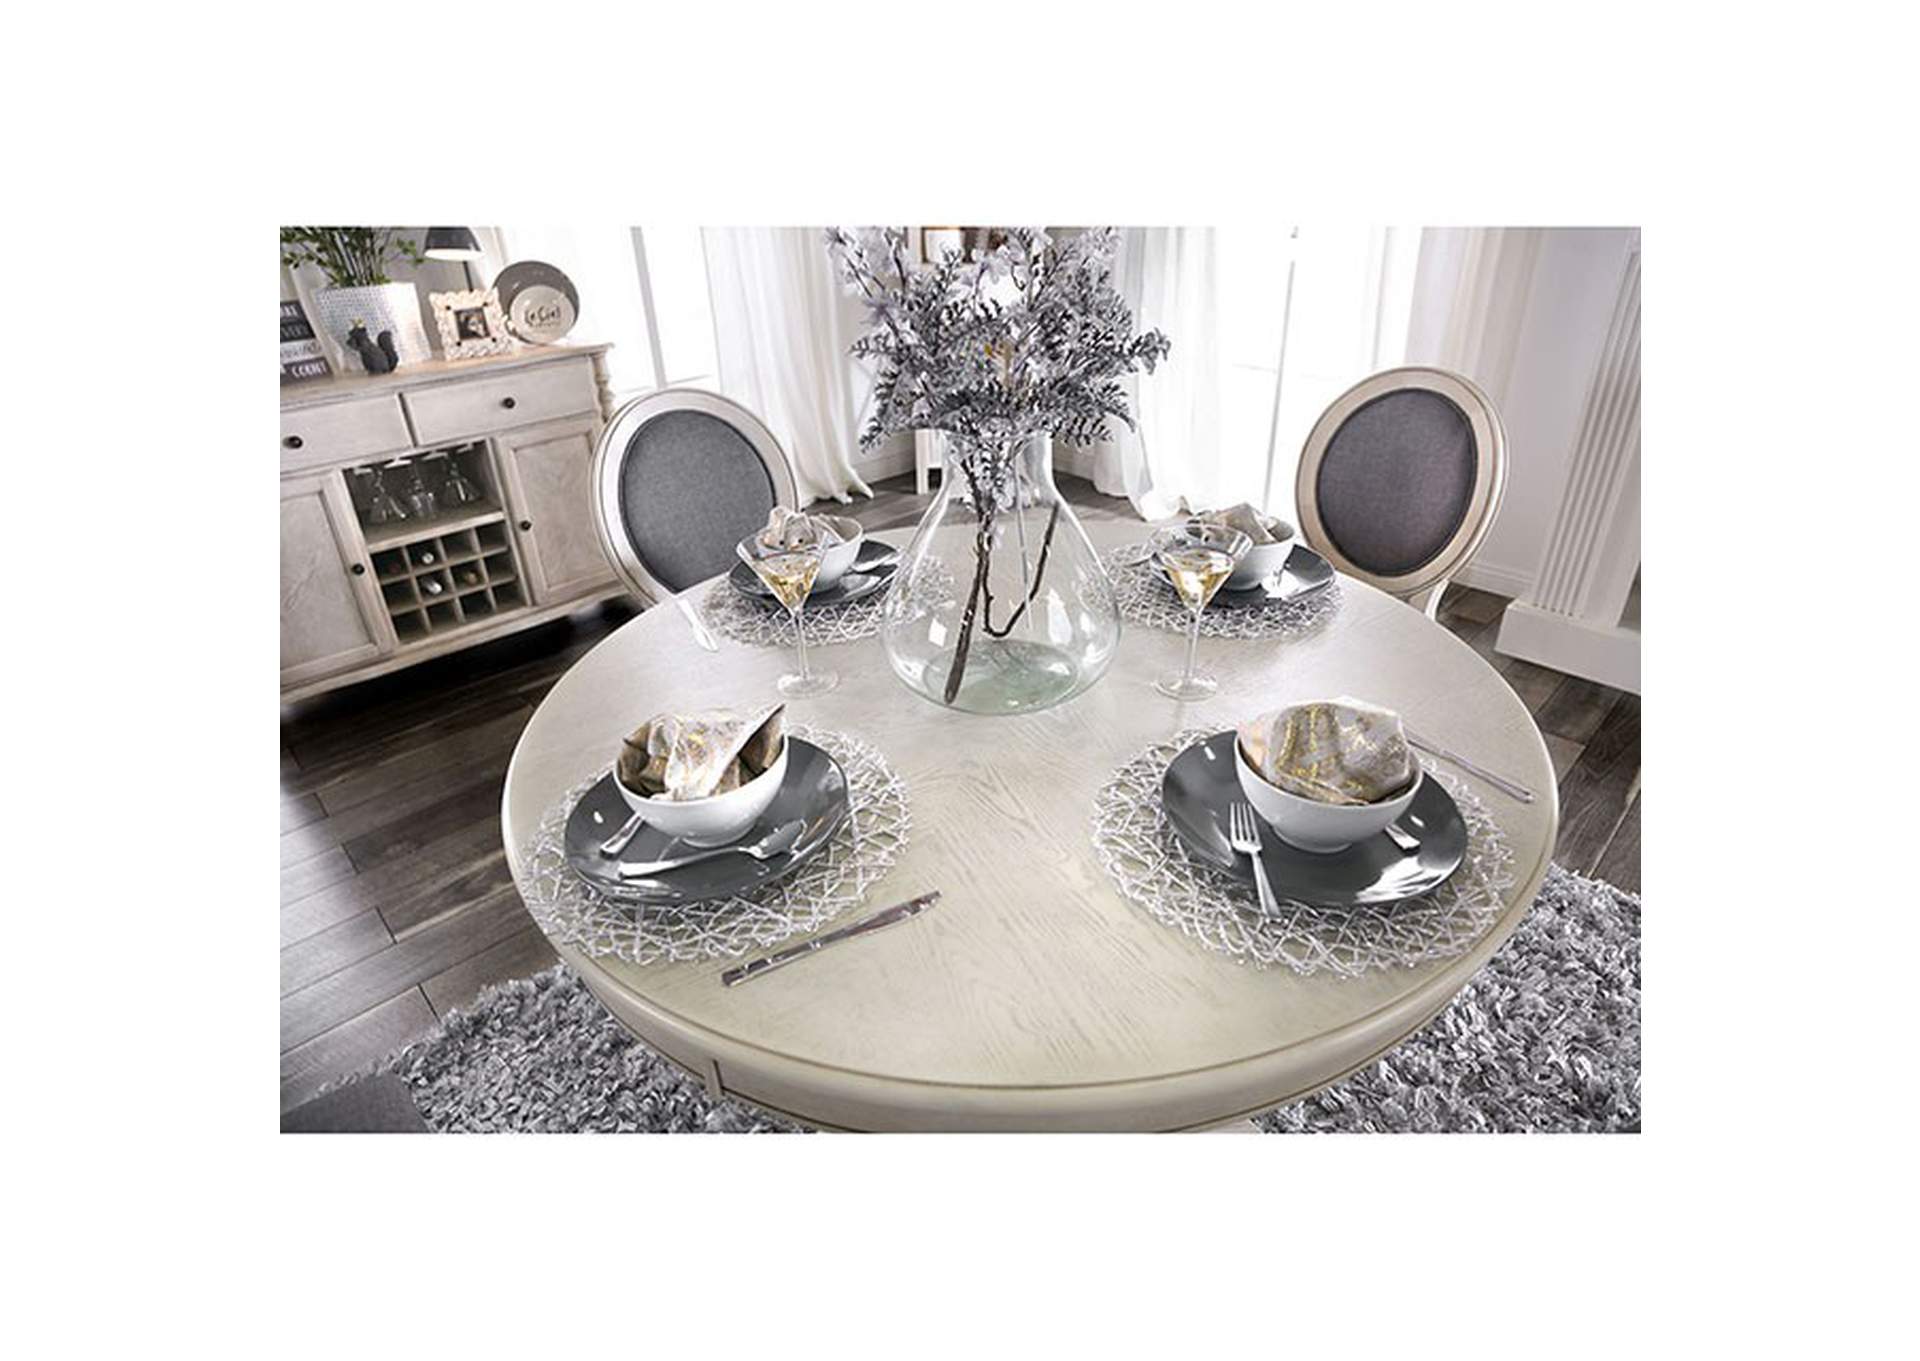 Kathryn Round Dining Table,Furniture of America